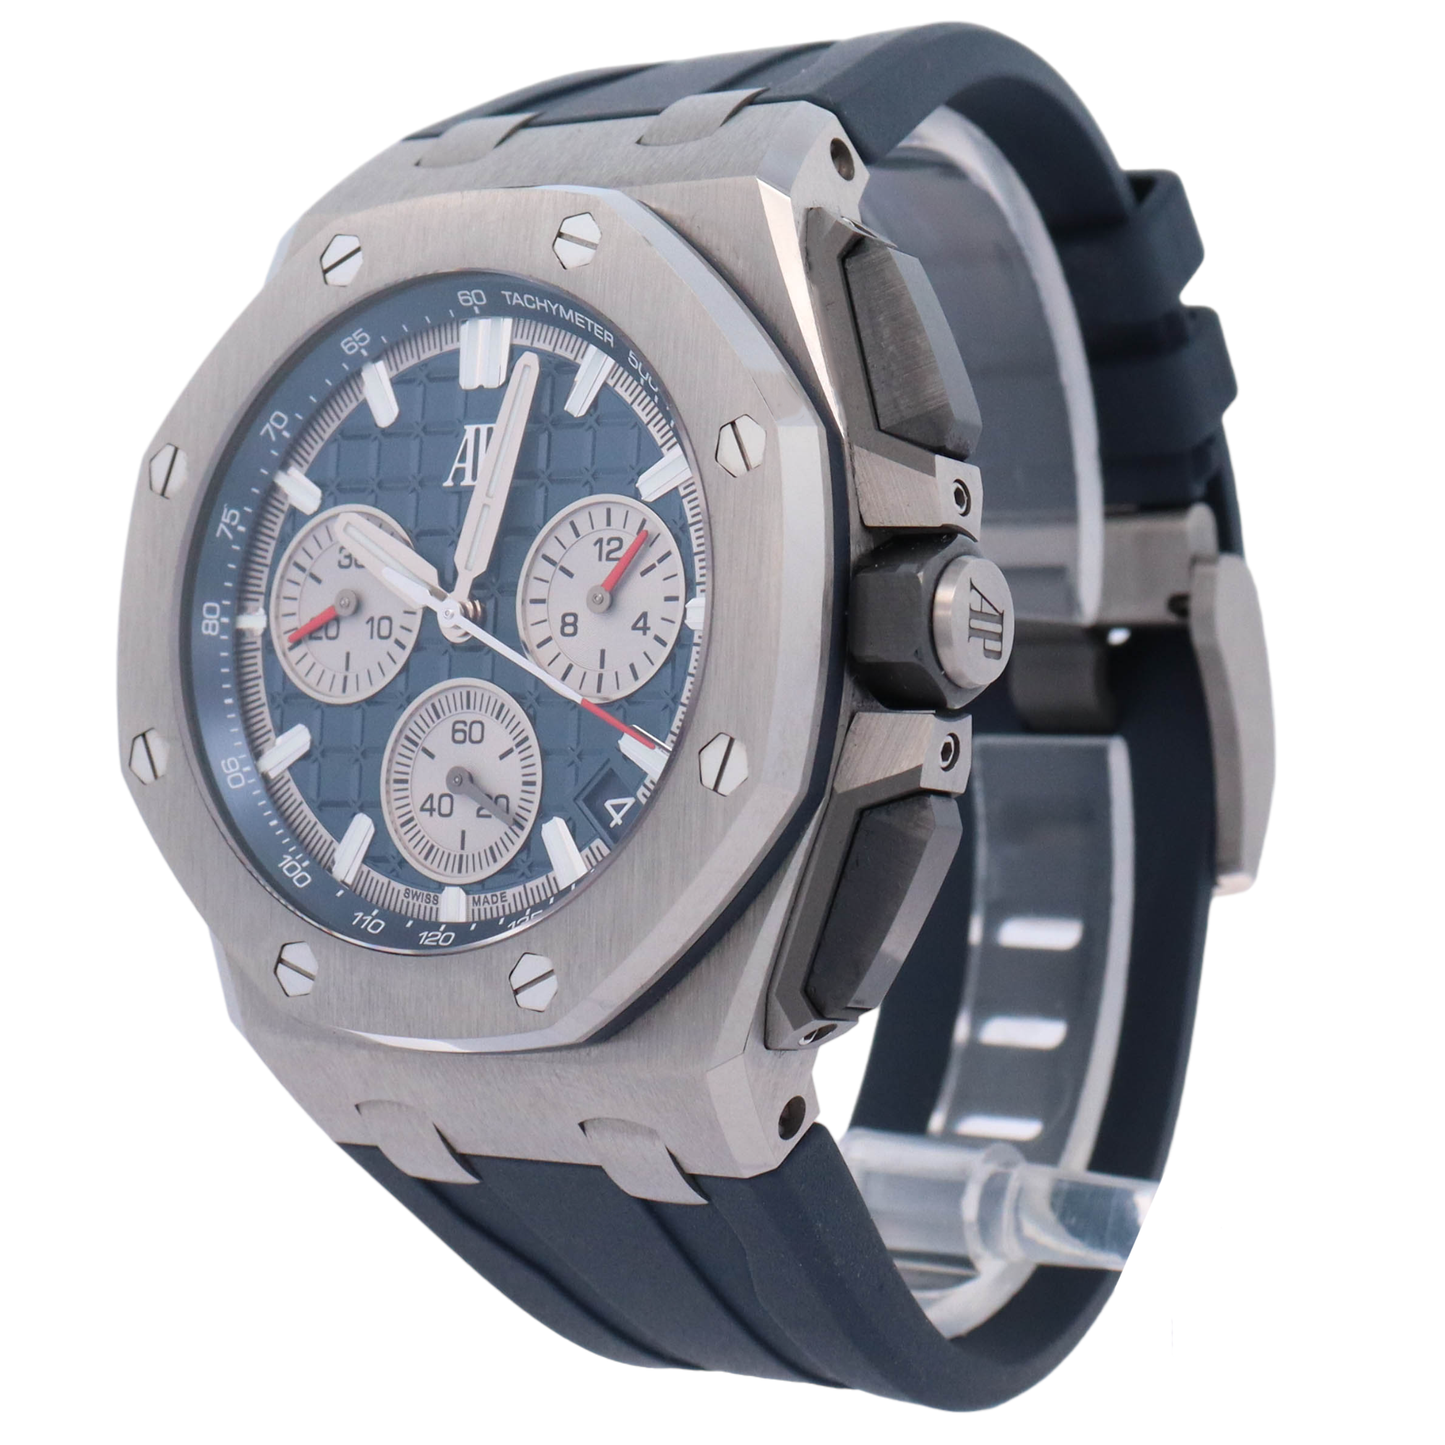 Audemars Piguet Royal Oak Offshore Stainless Steel 43mm Blue Chronograph Dial Watch Reference# 26420TI.OO.A027CA.01 - Happy Jewelers Fine Jewelry Lifetime Warranty